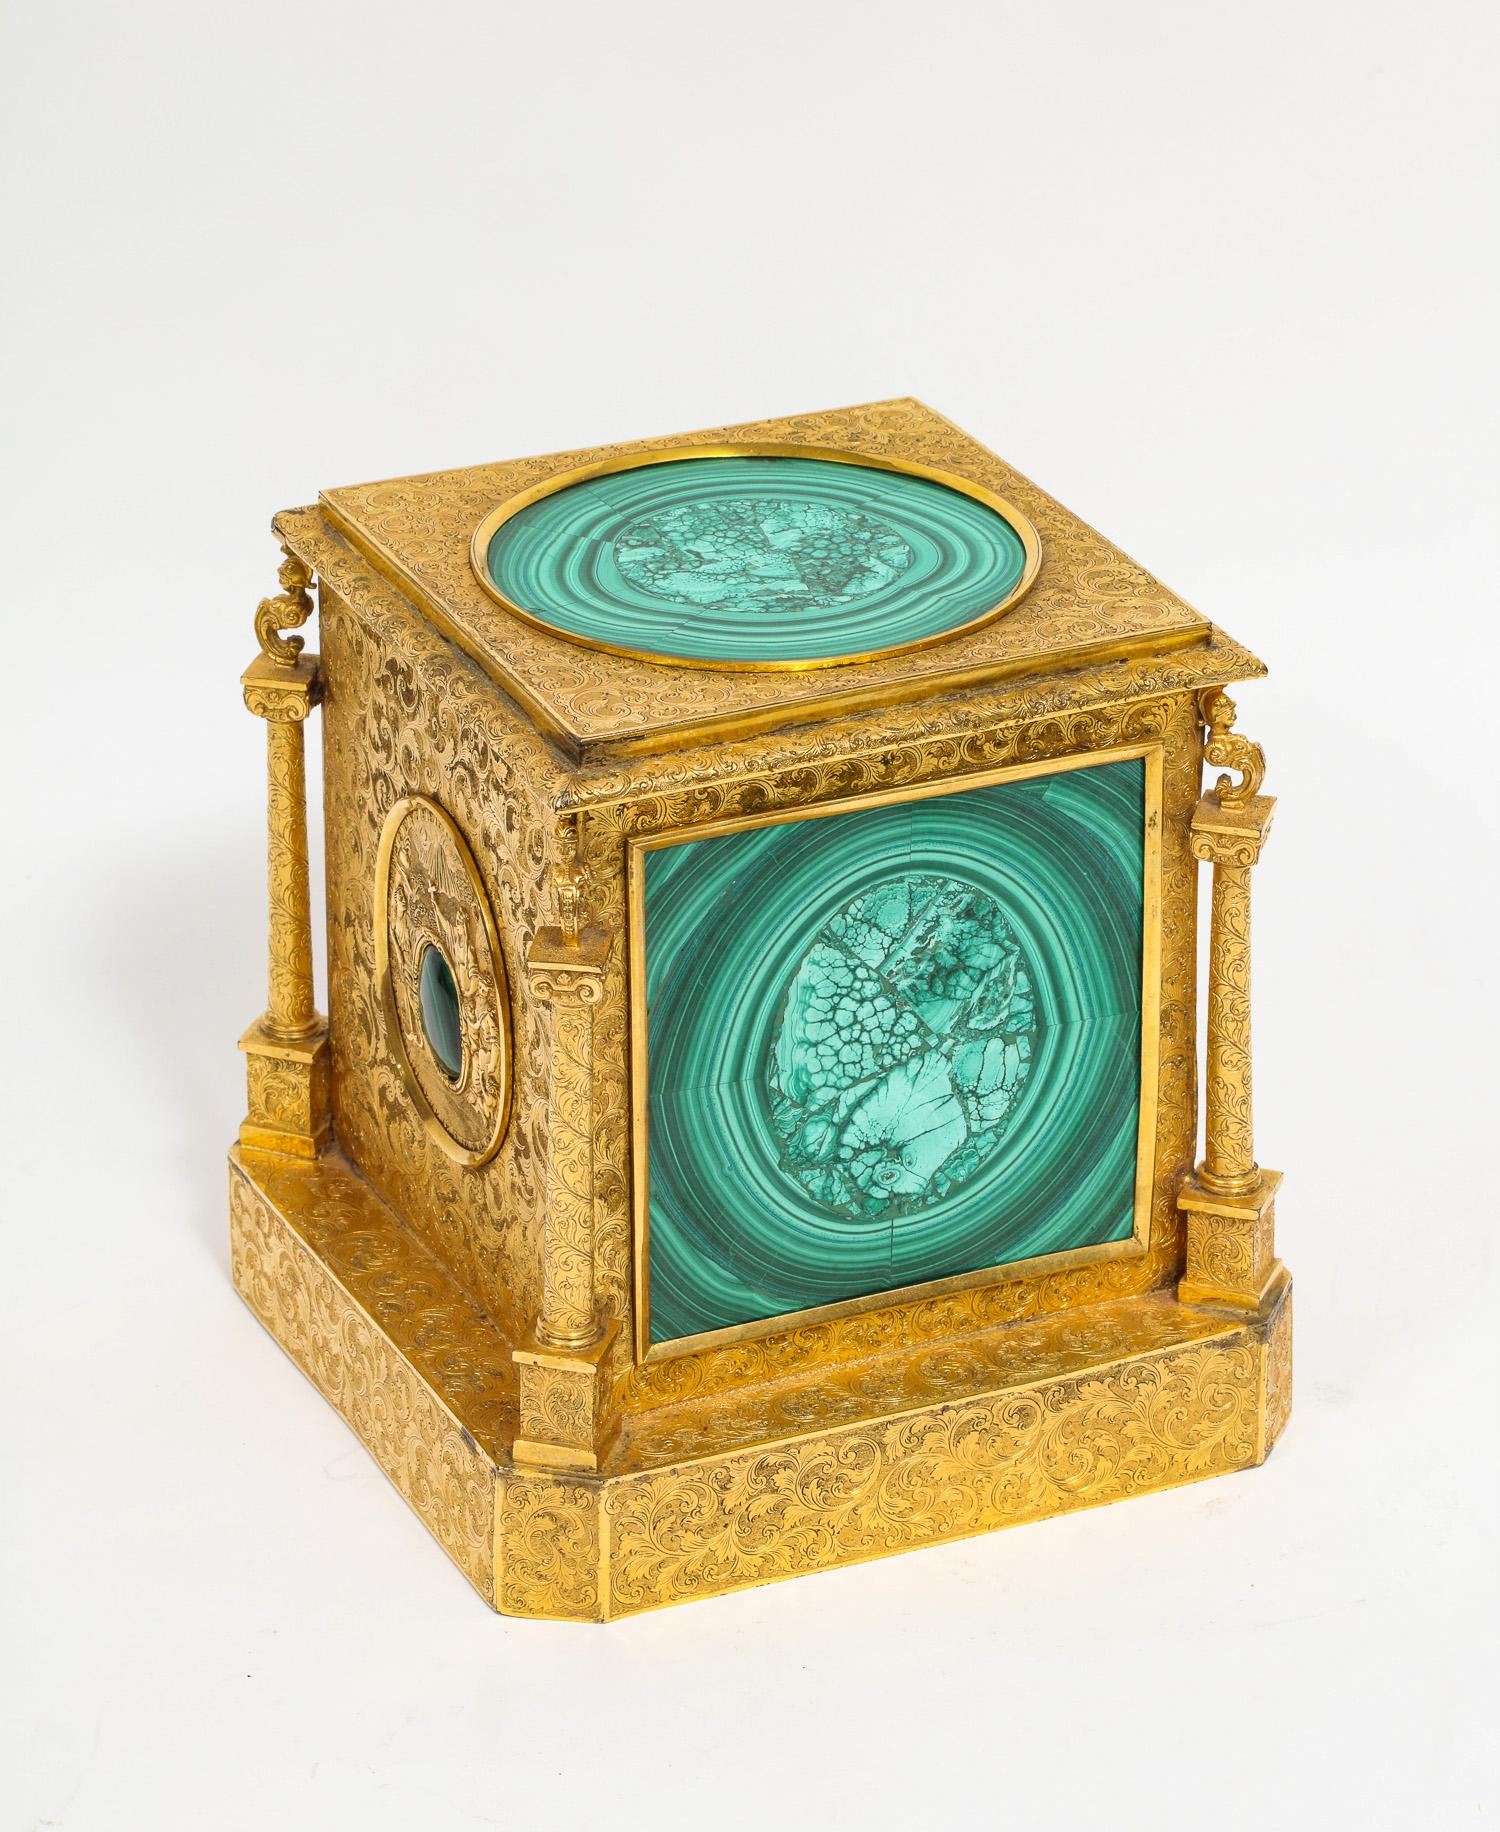 Exquisite quality Napoleon III engraved ormolu bronze and malachite perfume or scent bottle box or case,
Paris, circa 1870

The hinged lid enclosing the original - four aquamarine blue cut glass scent perfume bottles with stoppers, all in mint